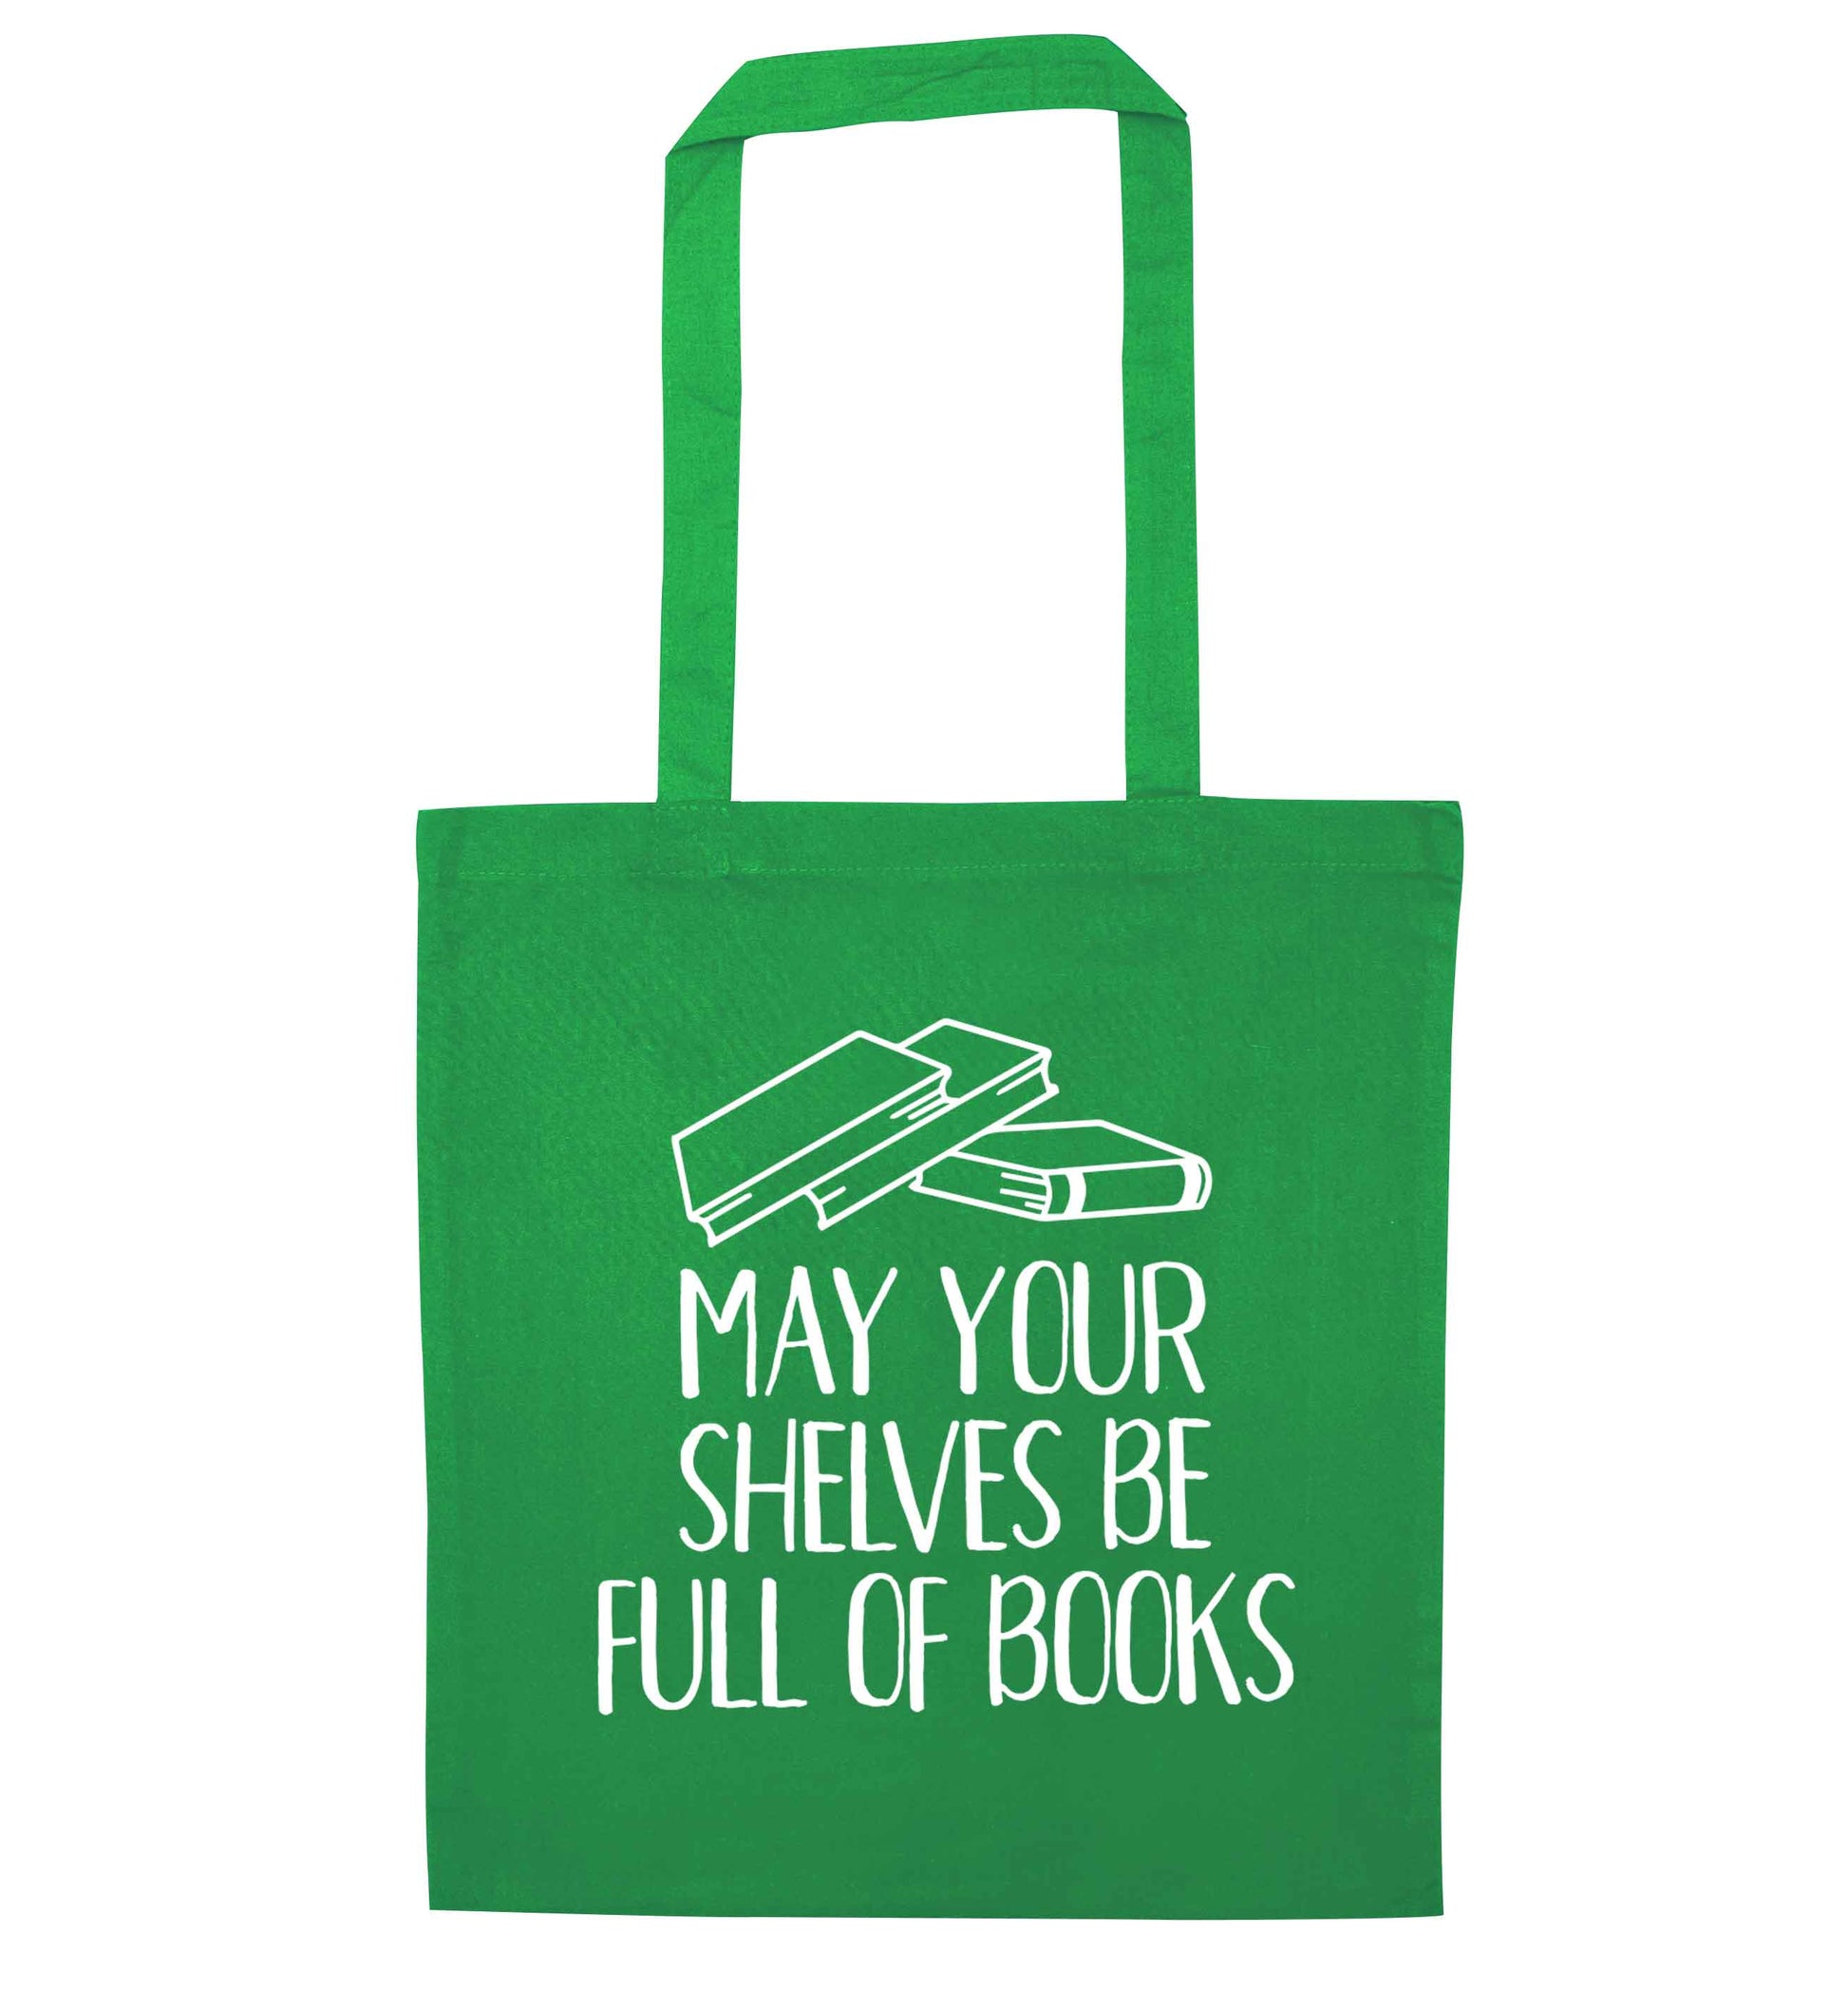 May your shelves be full of books green tote bag